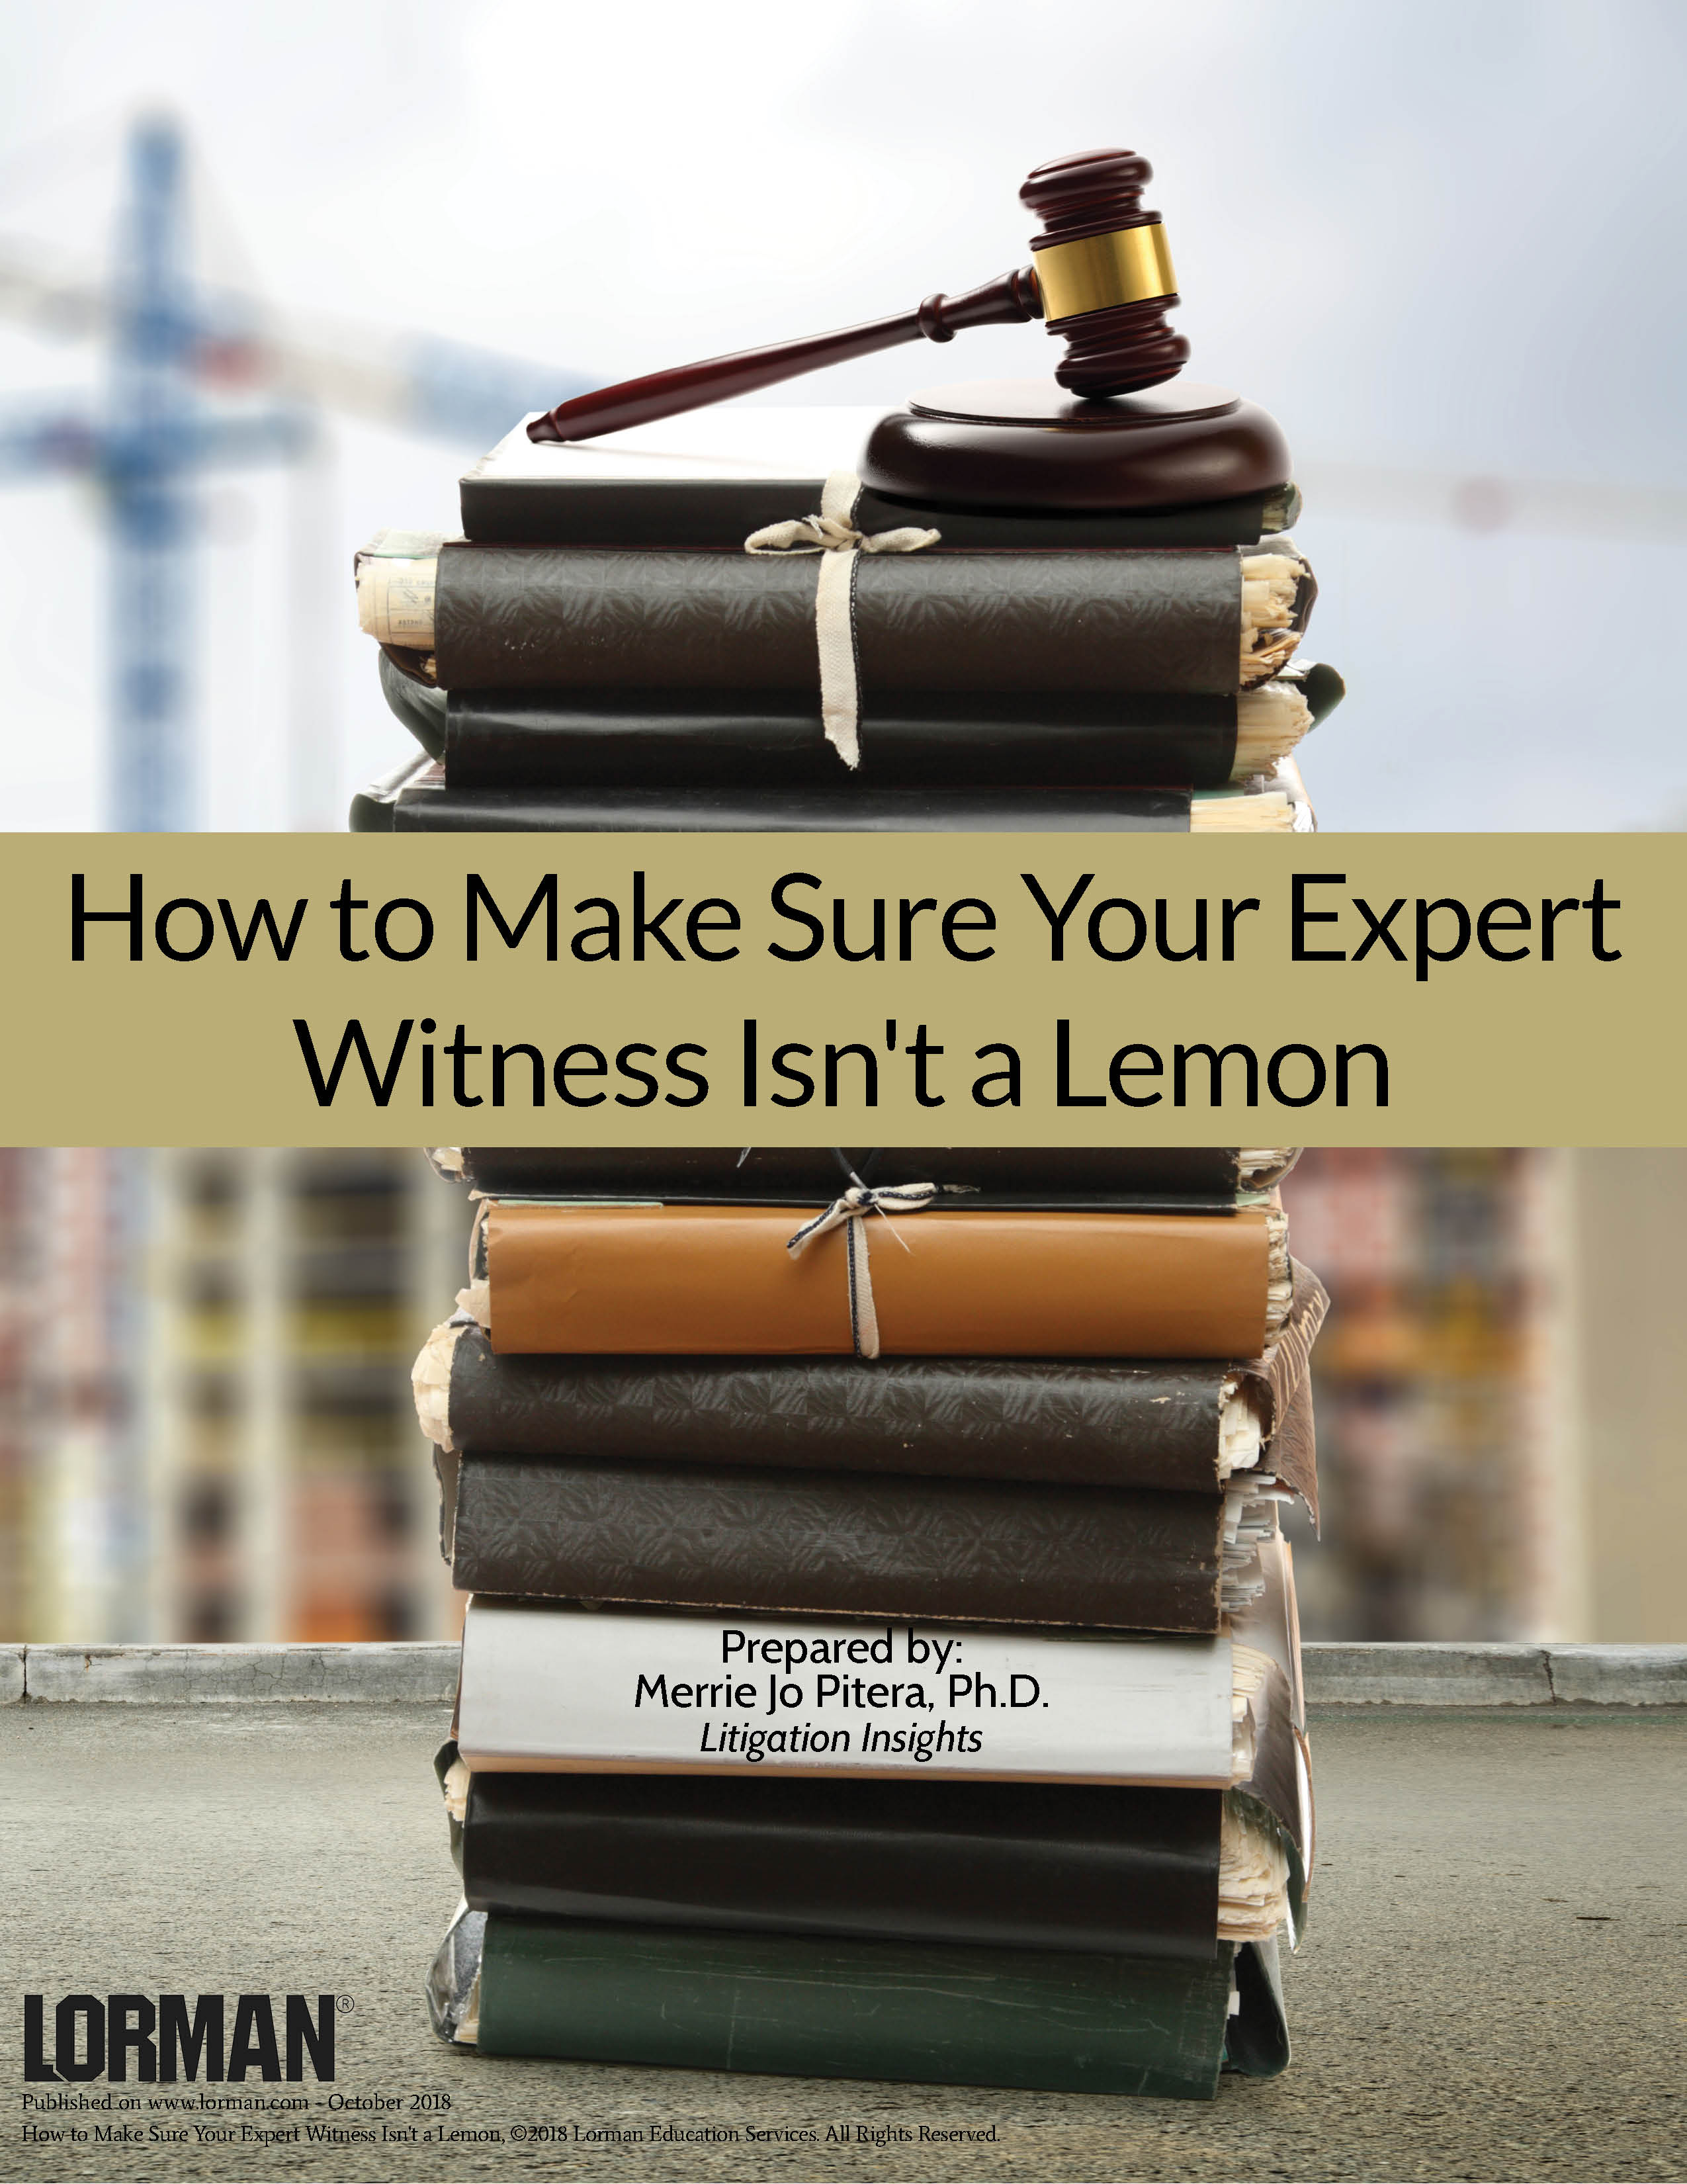 How to Make Sure Your Expert Witness Isn't a Lemon